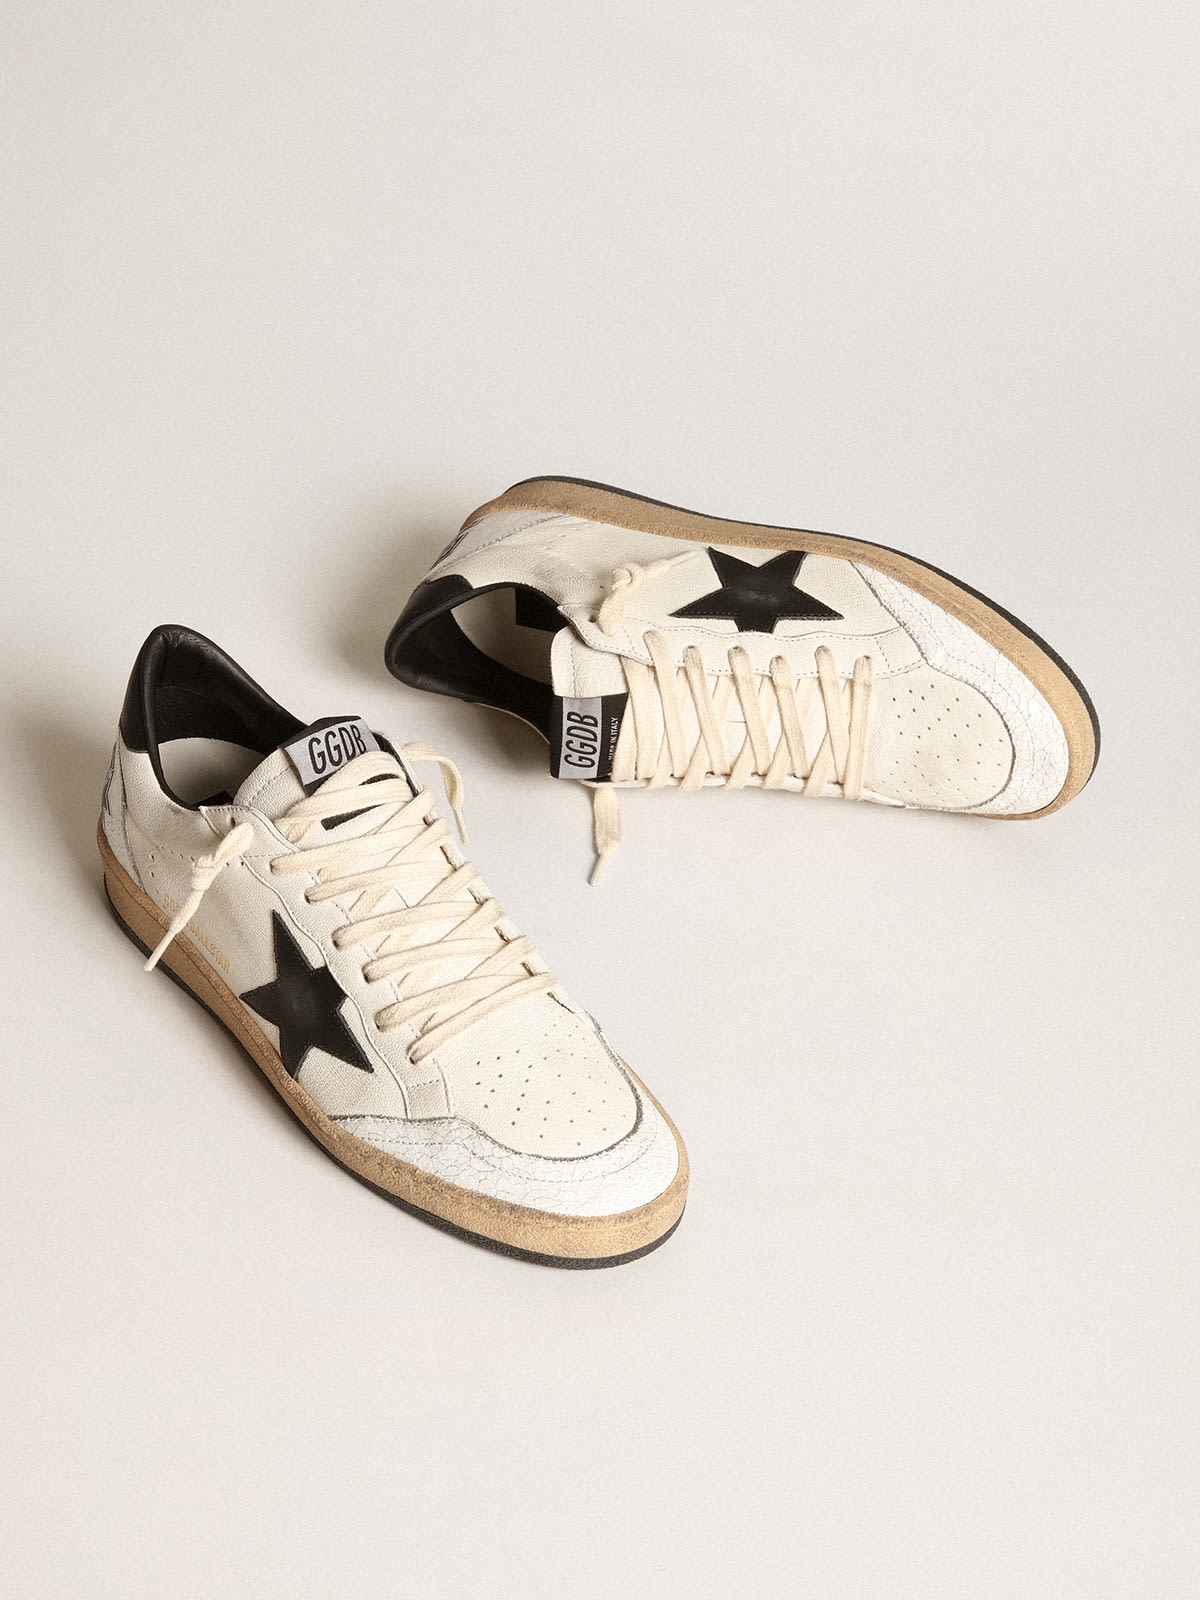 Golden Goose Women's Ball Star sneakers in white nappa leather